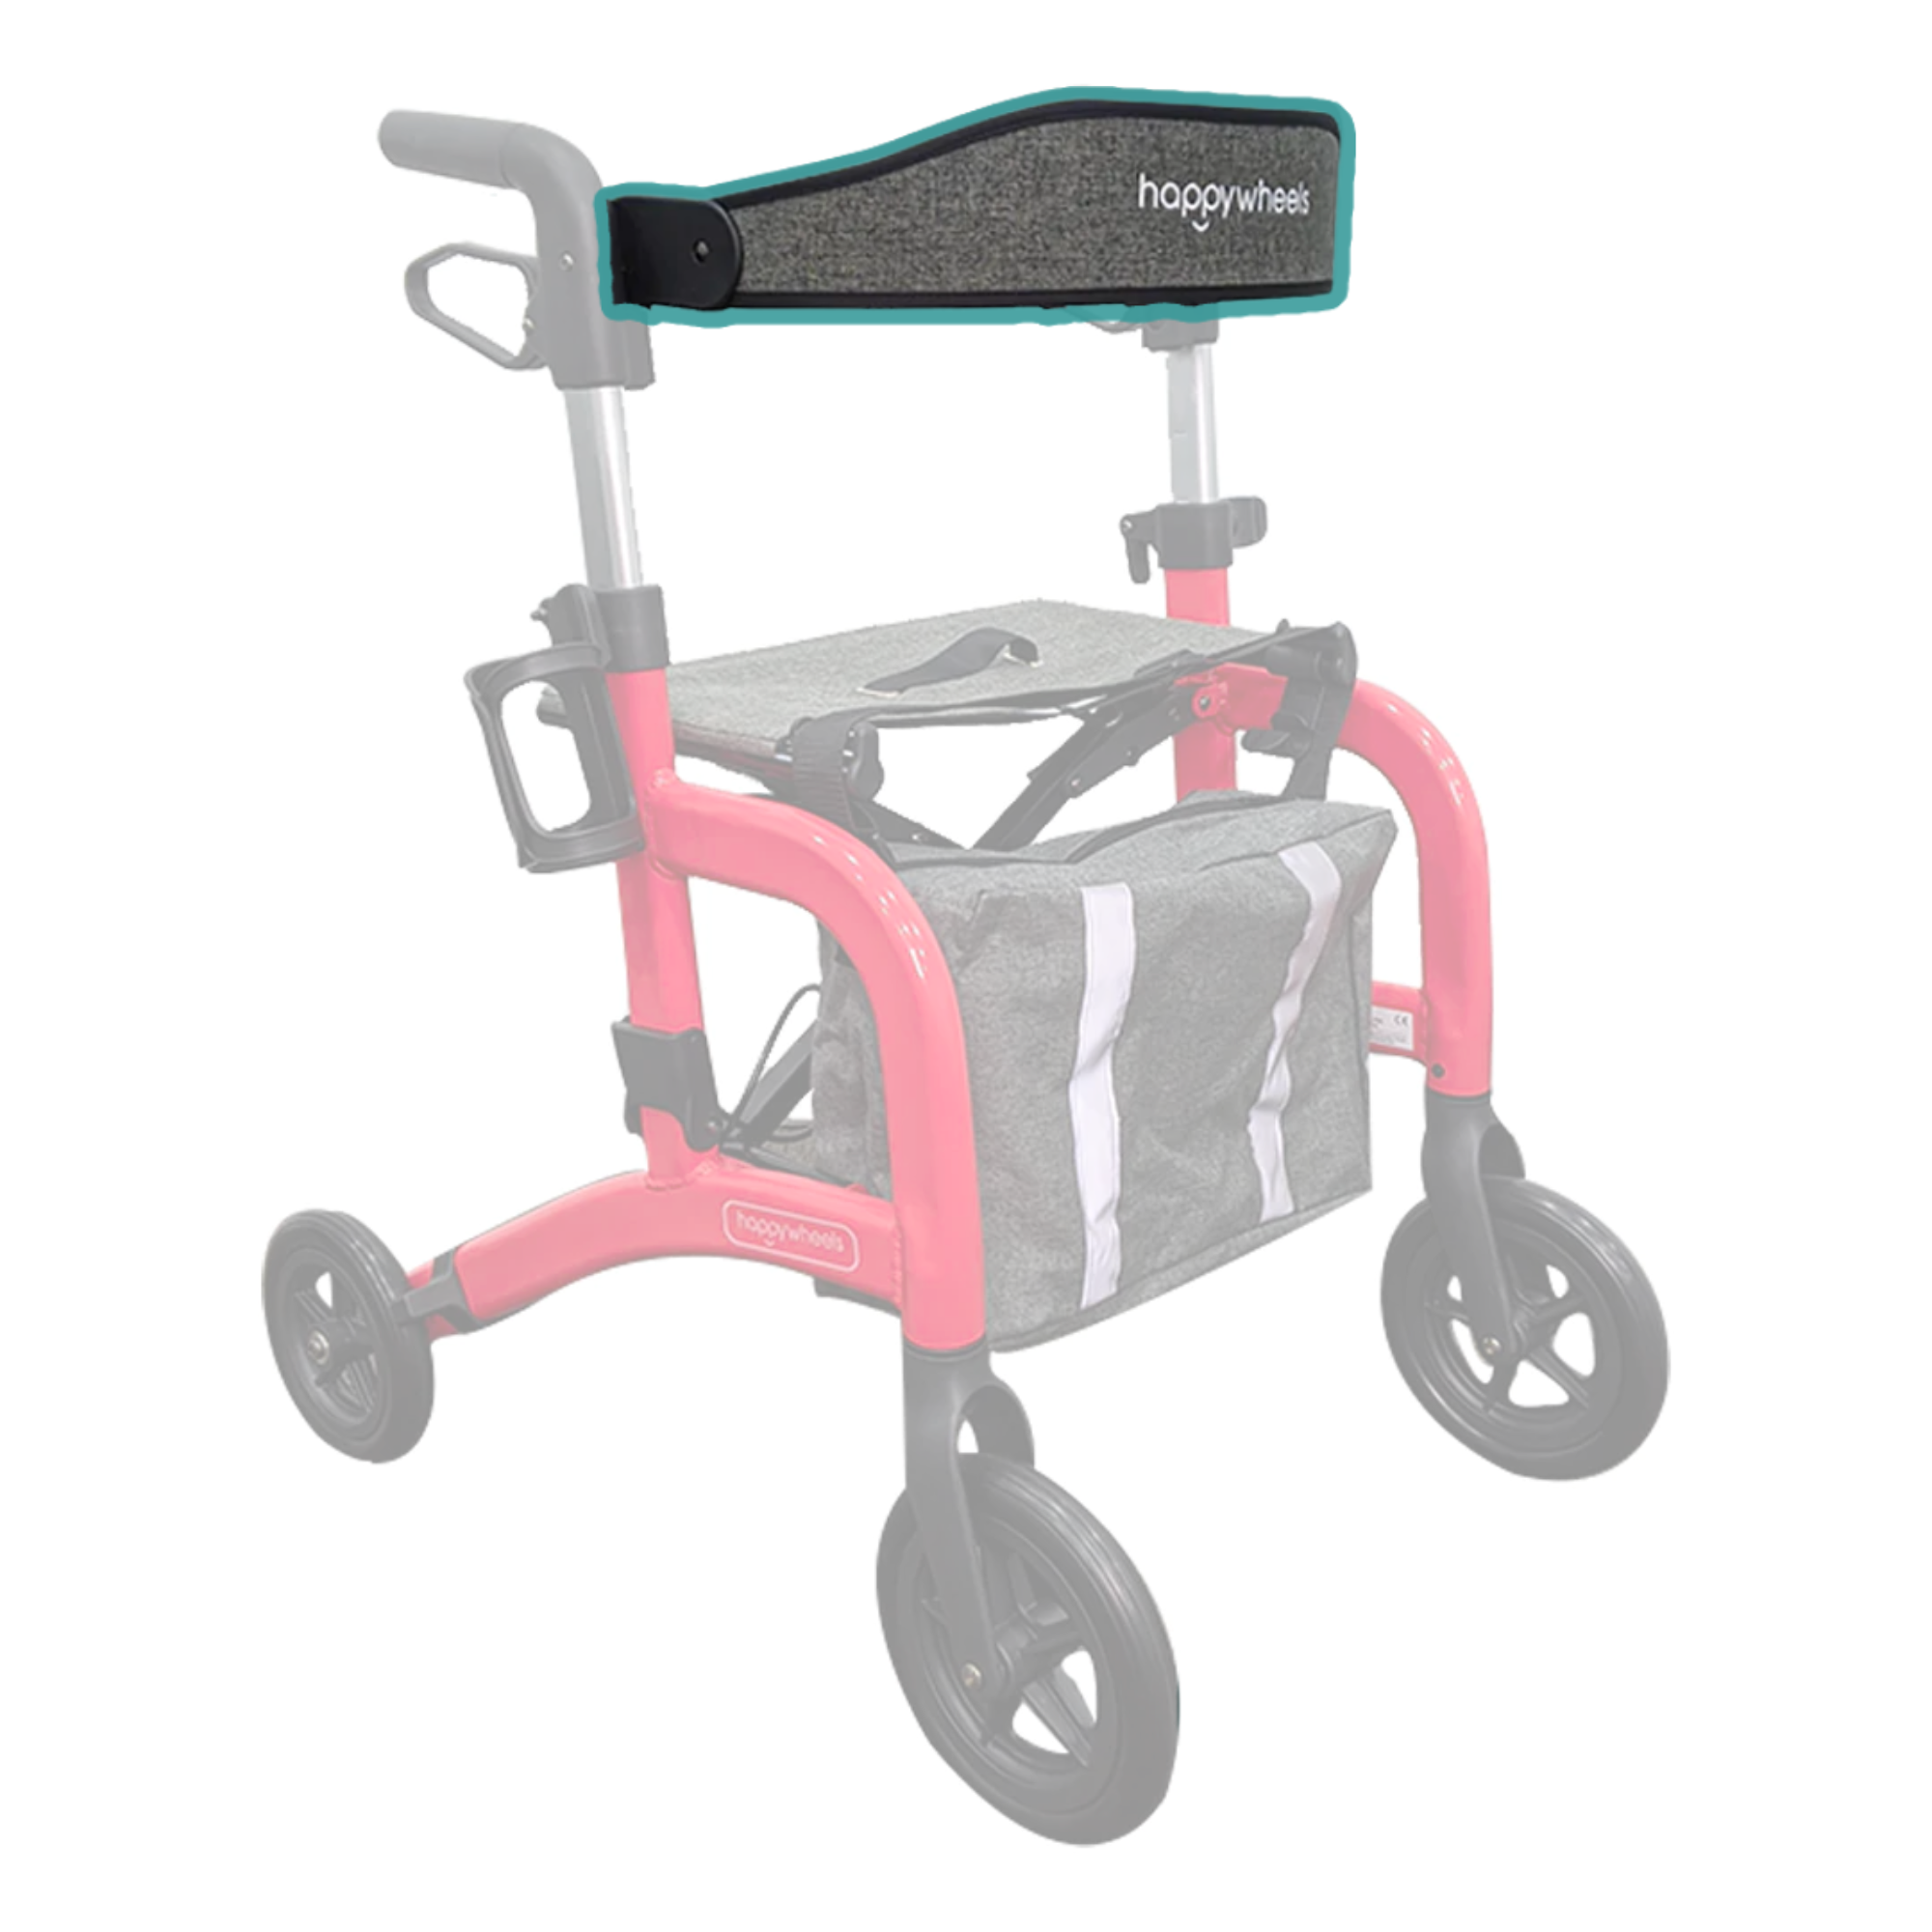 https://cdn.shopify.com/s/files/1/0096/6162/products/happywheels-lightweight-travel-rollator-spare-parts-back-support-38909044654337_2000x.png?v=1668019367